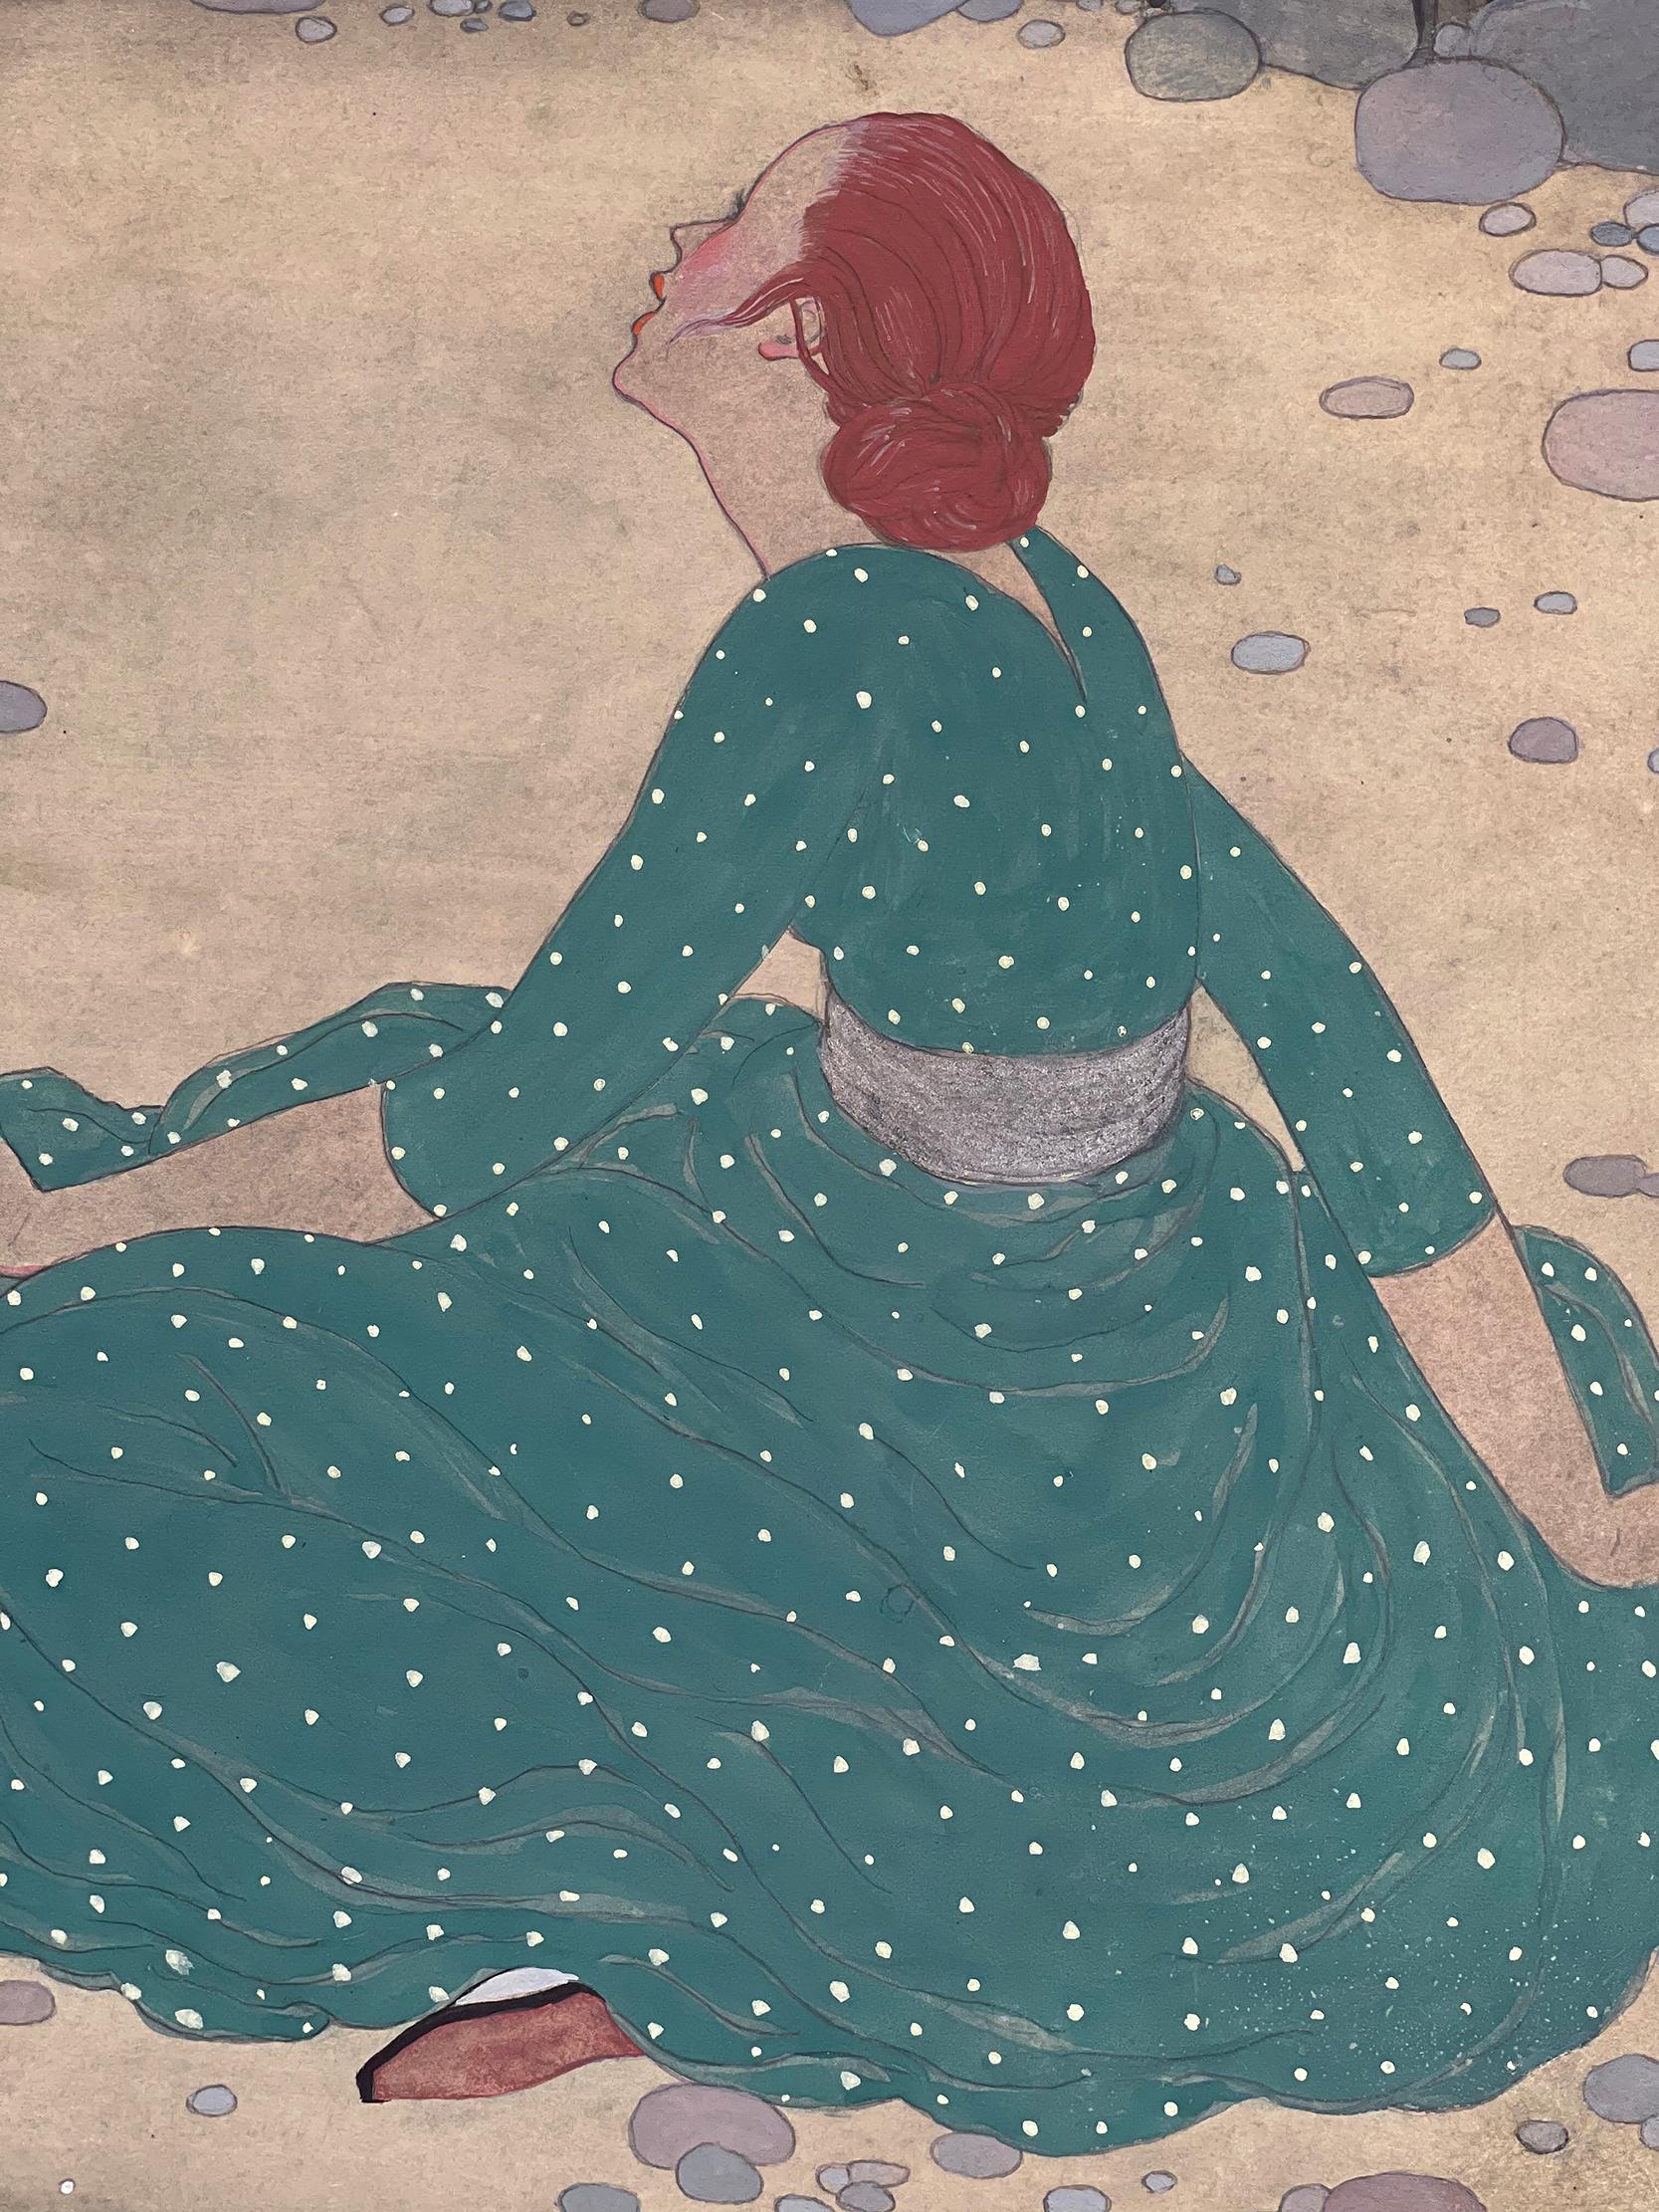 In this painting, Art Nouveau French illustrator Georges Lepape depicts a high moment of personal drama.  He exquisitely renders a beautiful yet solitary woman sitting on the beach.  She is dressed in a patterned green dress. He captures the precise